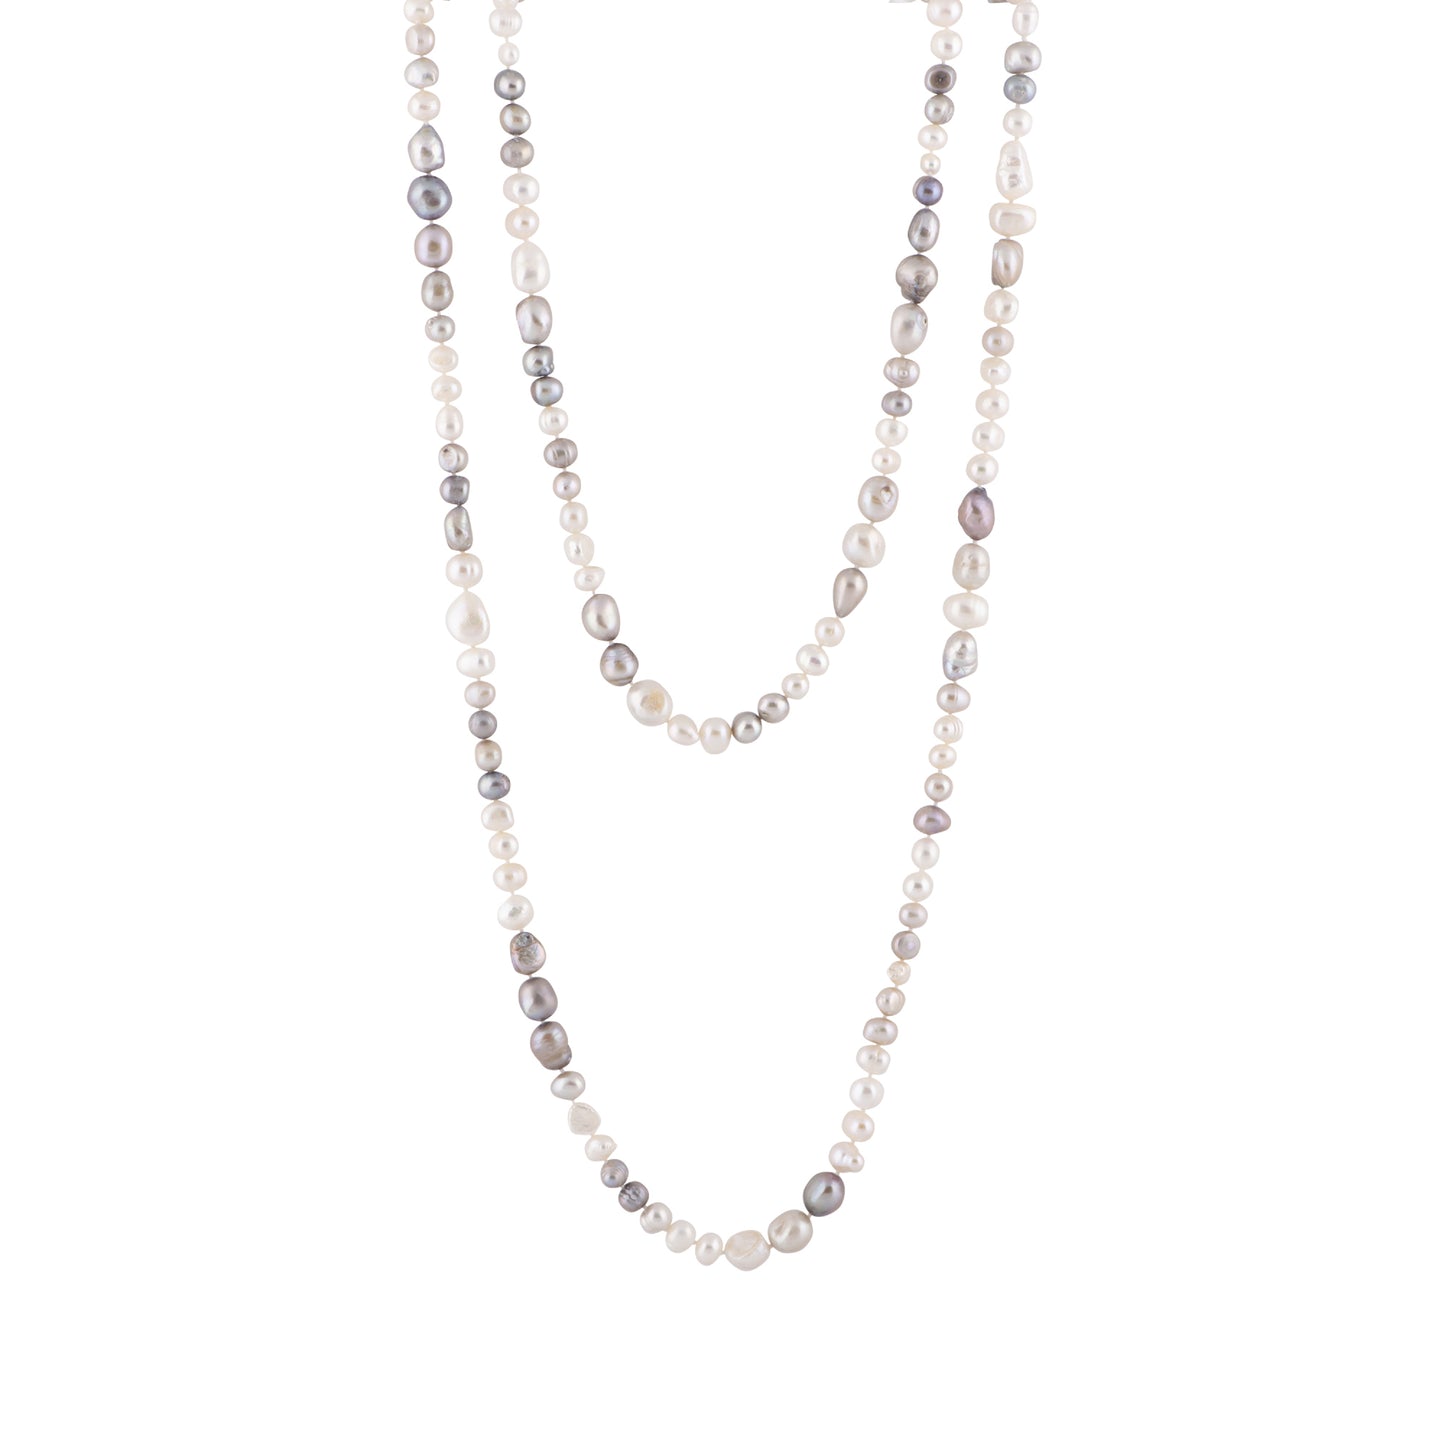 Allison - Long freshwater white pearl necklace (White & silver pearls)